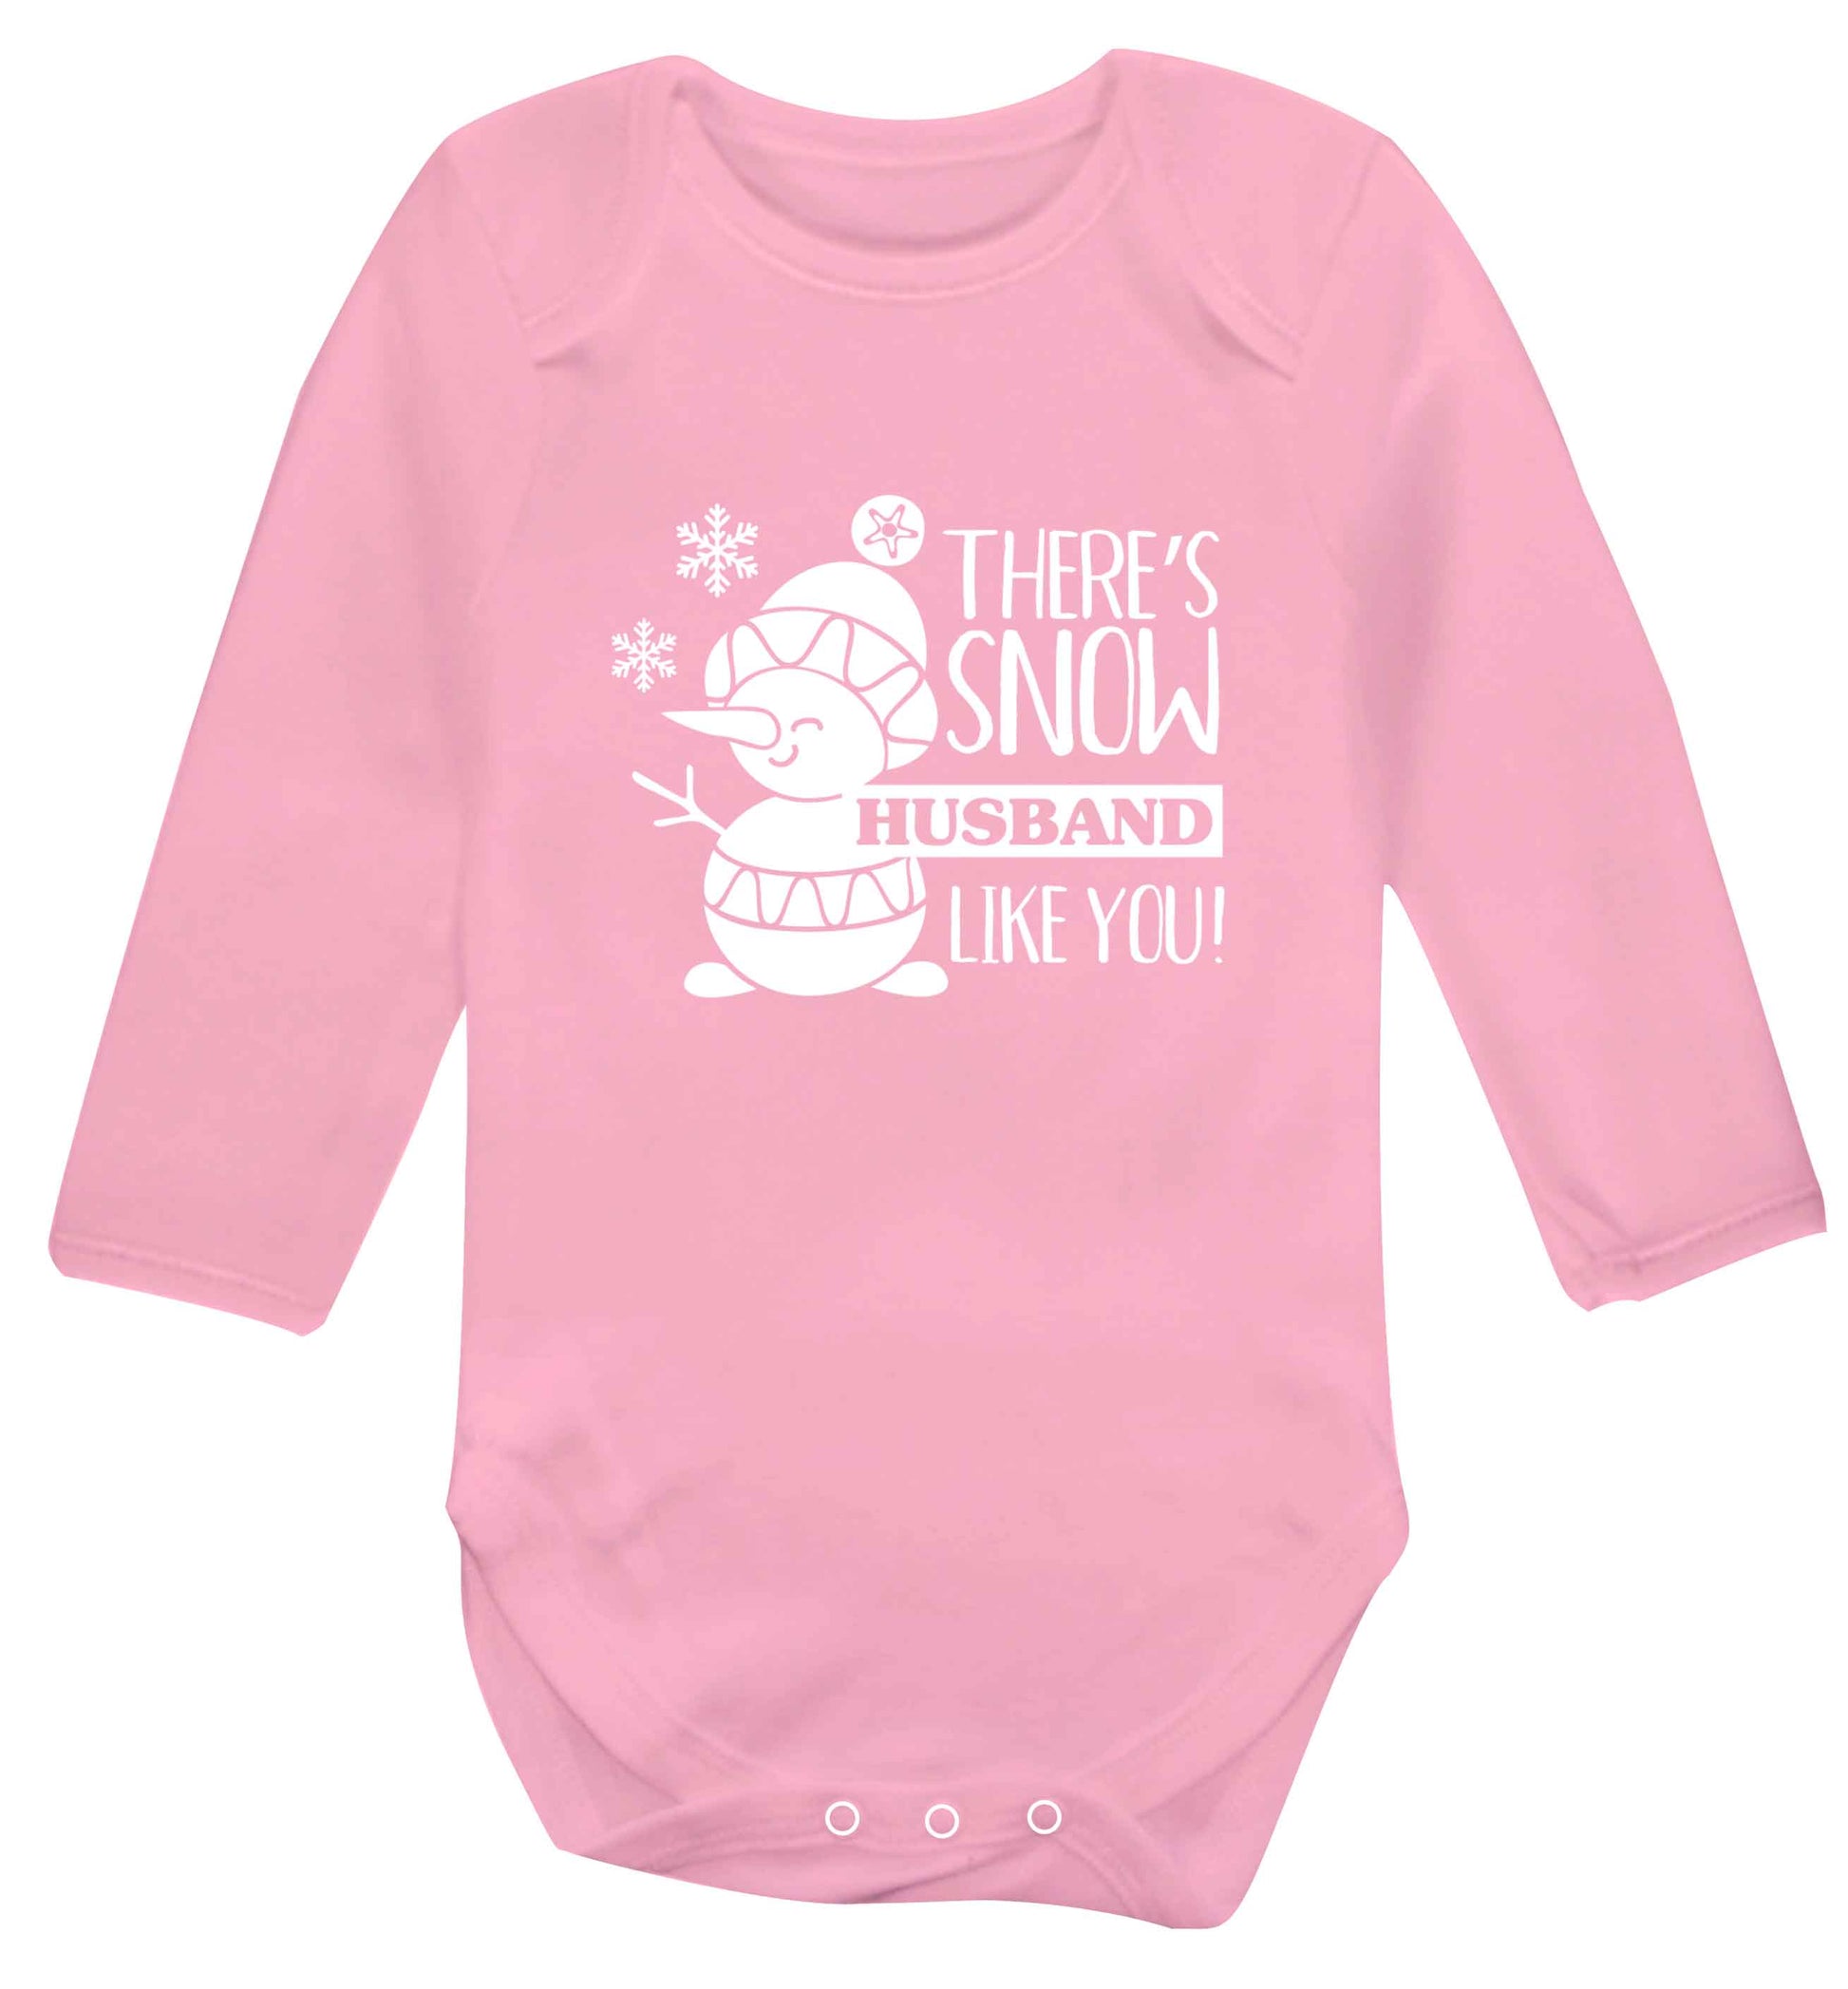 There's snow husband like you baby vest long sleeved pale pink 6-12 months